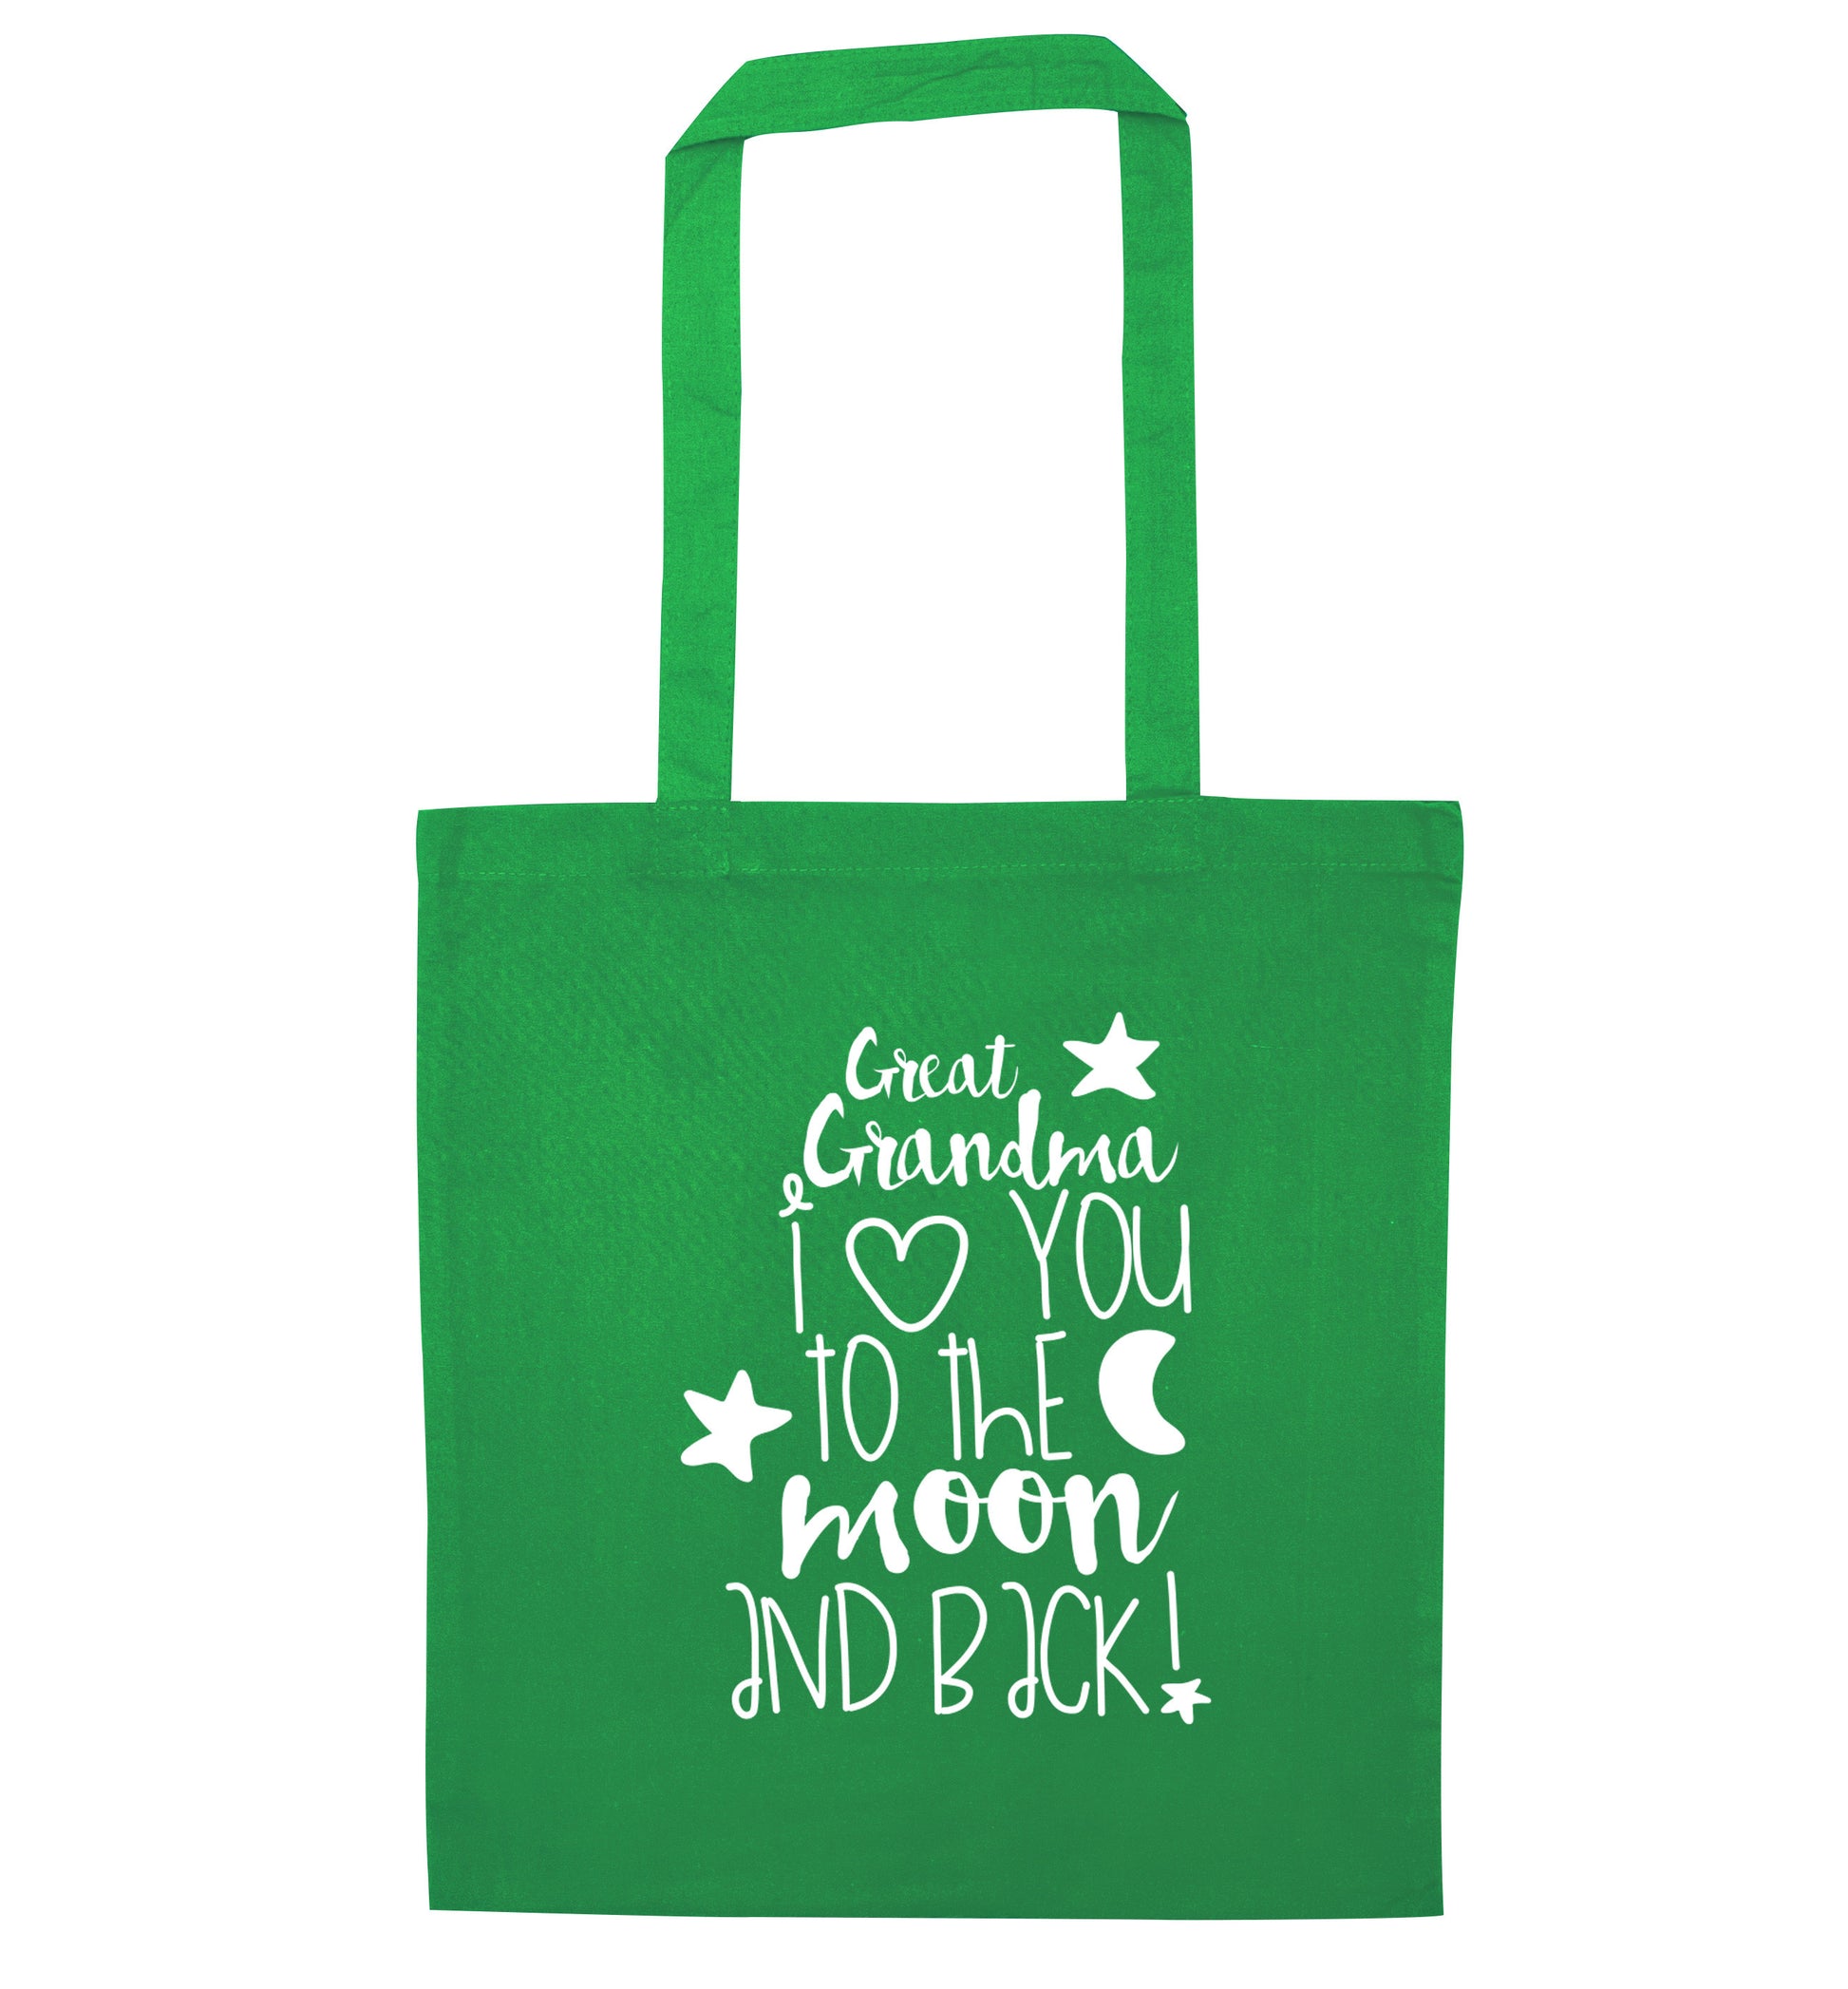 Great Grandma I love you to the moon and back green tote bag